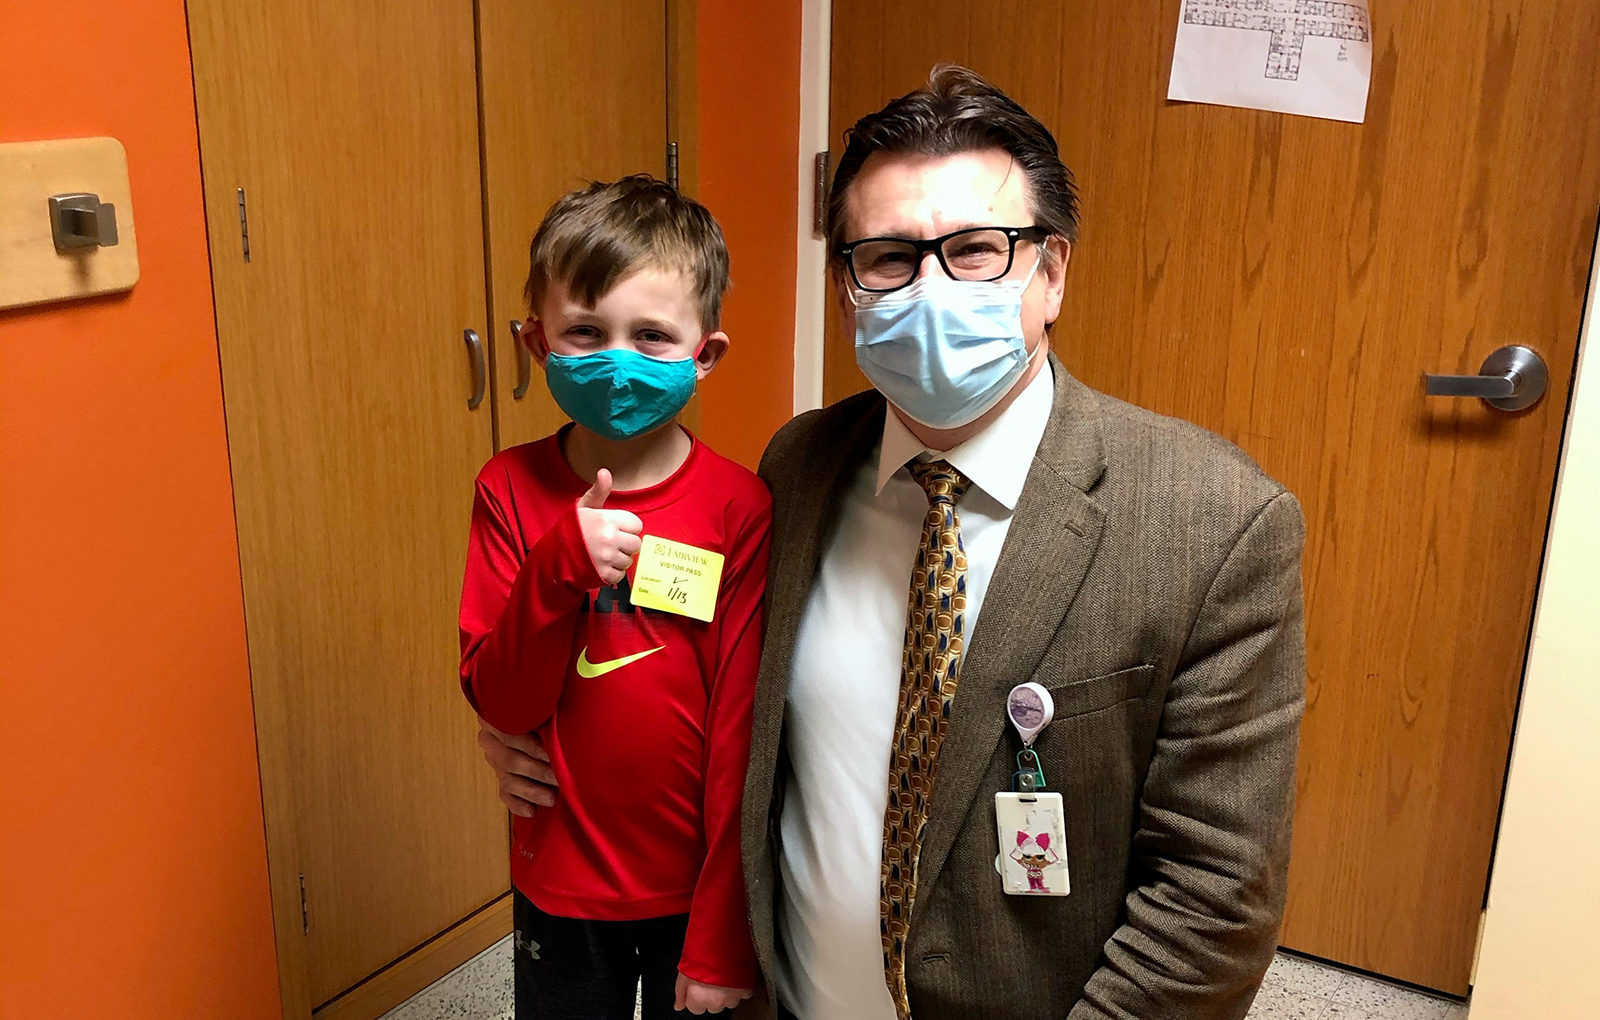 Dr. Lund and a patient